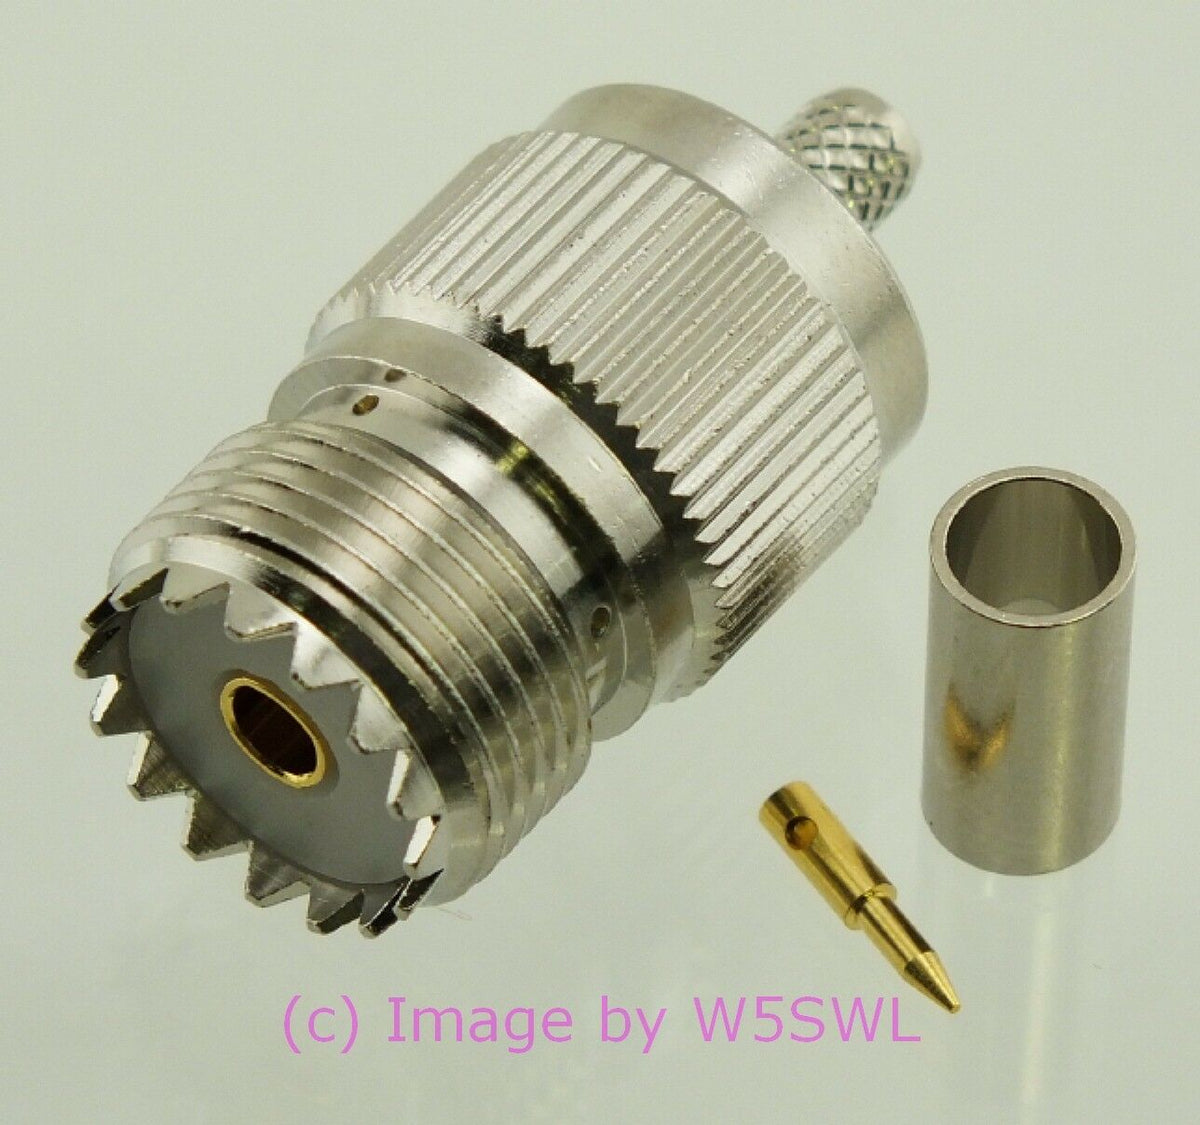 W5SWL Brand UHF Female Coax Connector RG-58 Crimp - Dave's Hobby Shop by W5SWL